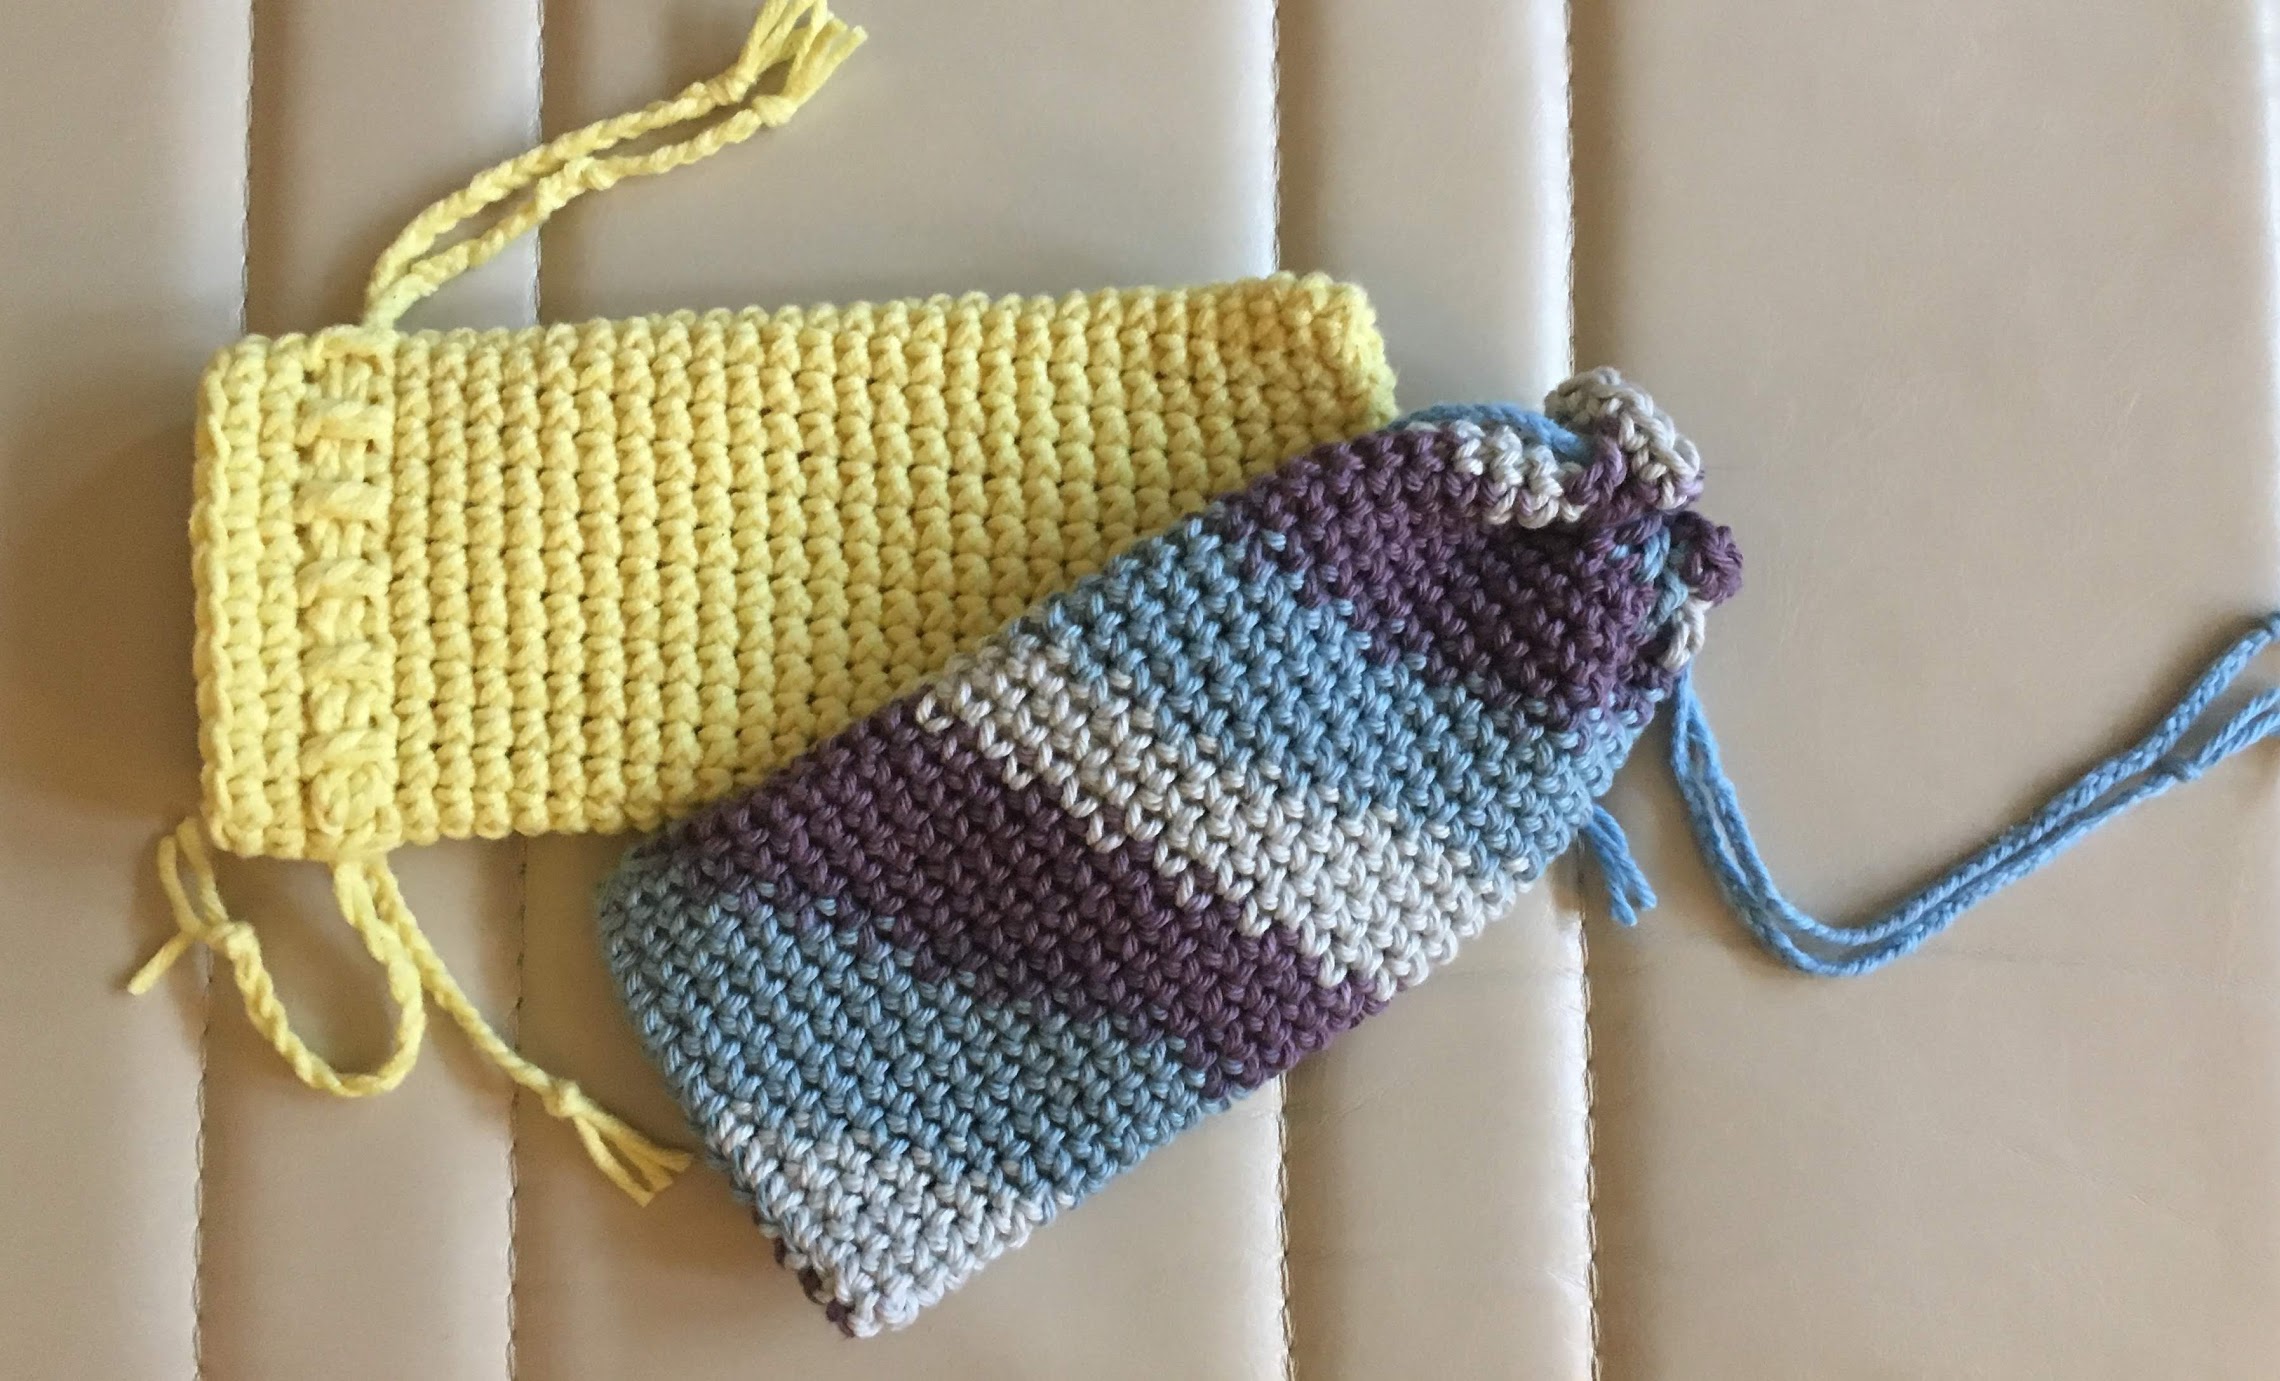 How to Make a Quick Crochet Sunglasses Pouch Free Pattern with Photos - A  Crafty Concept